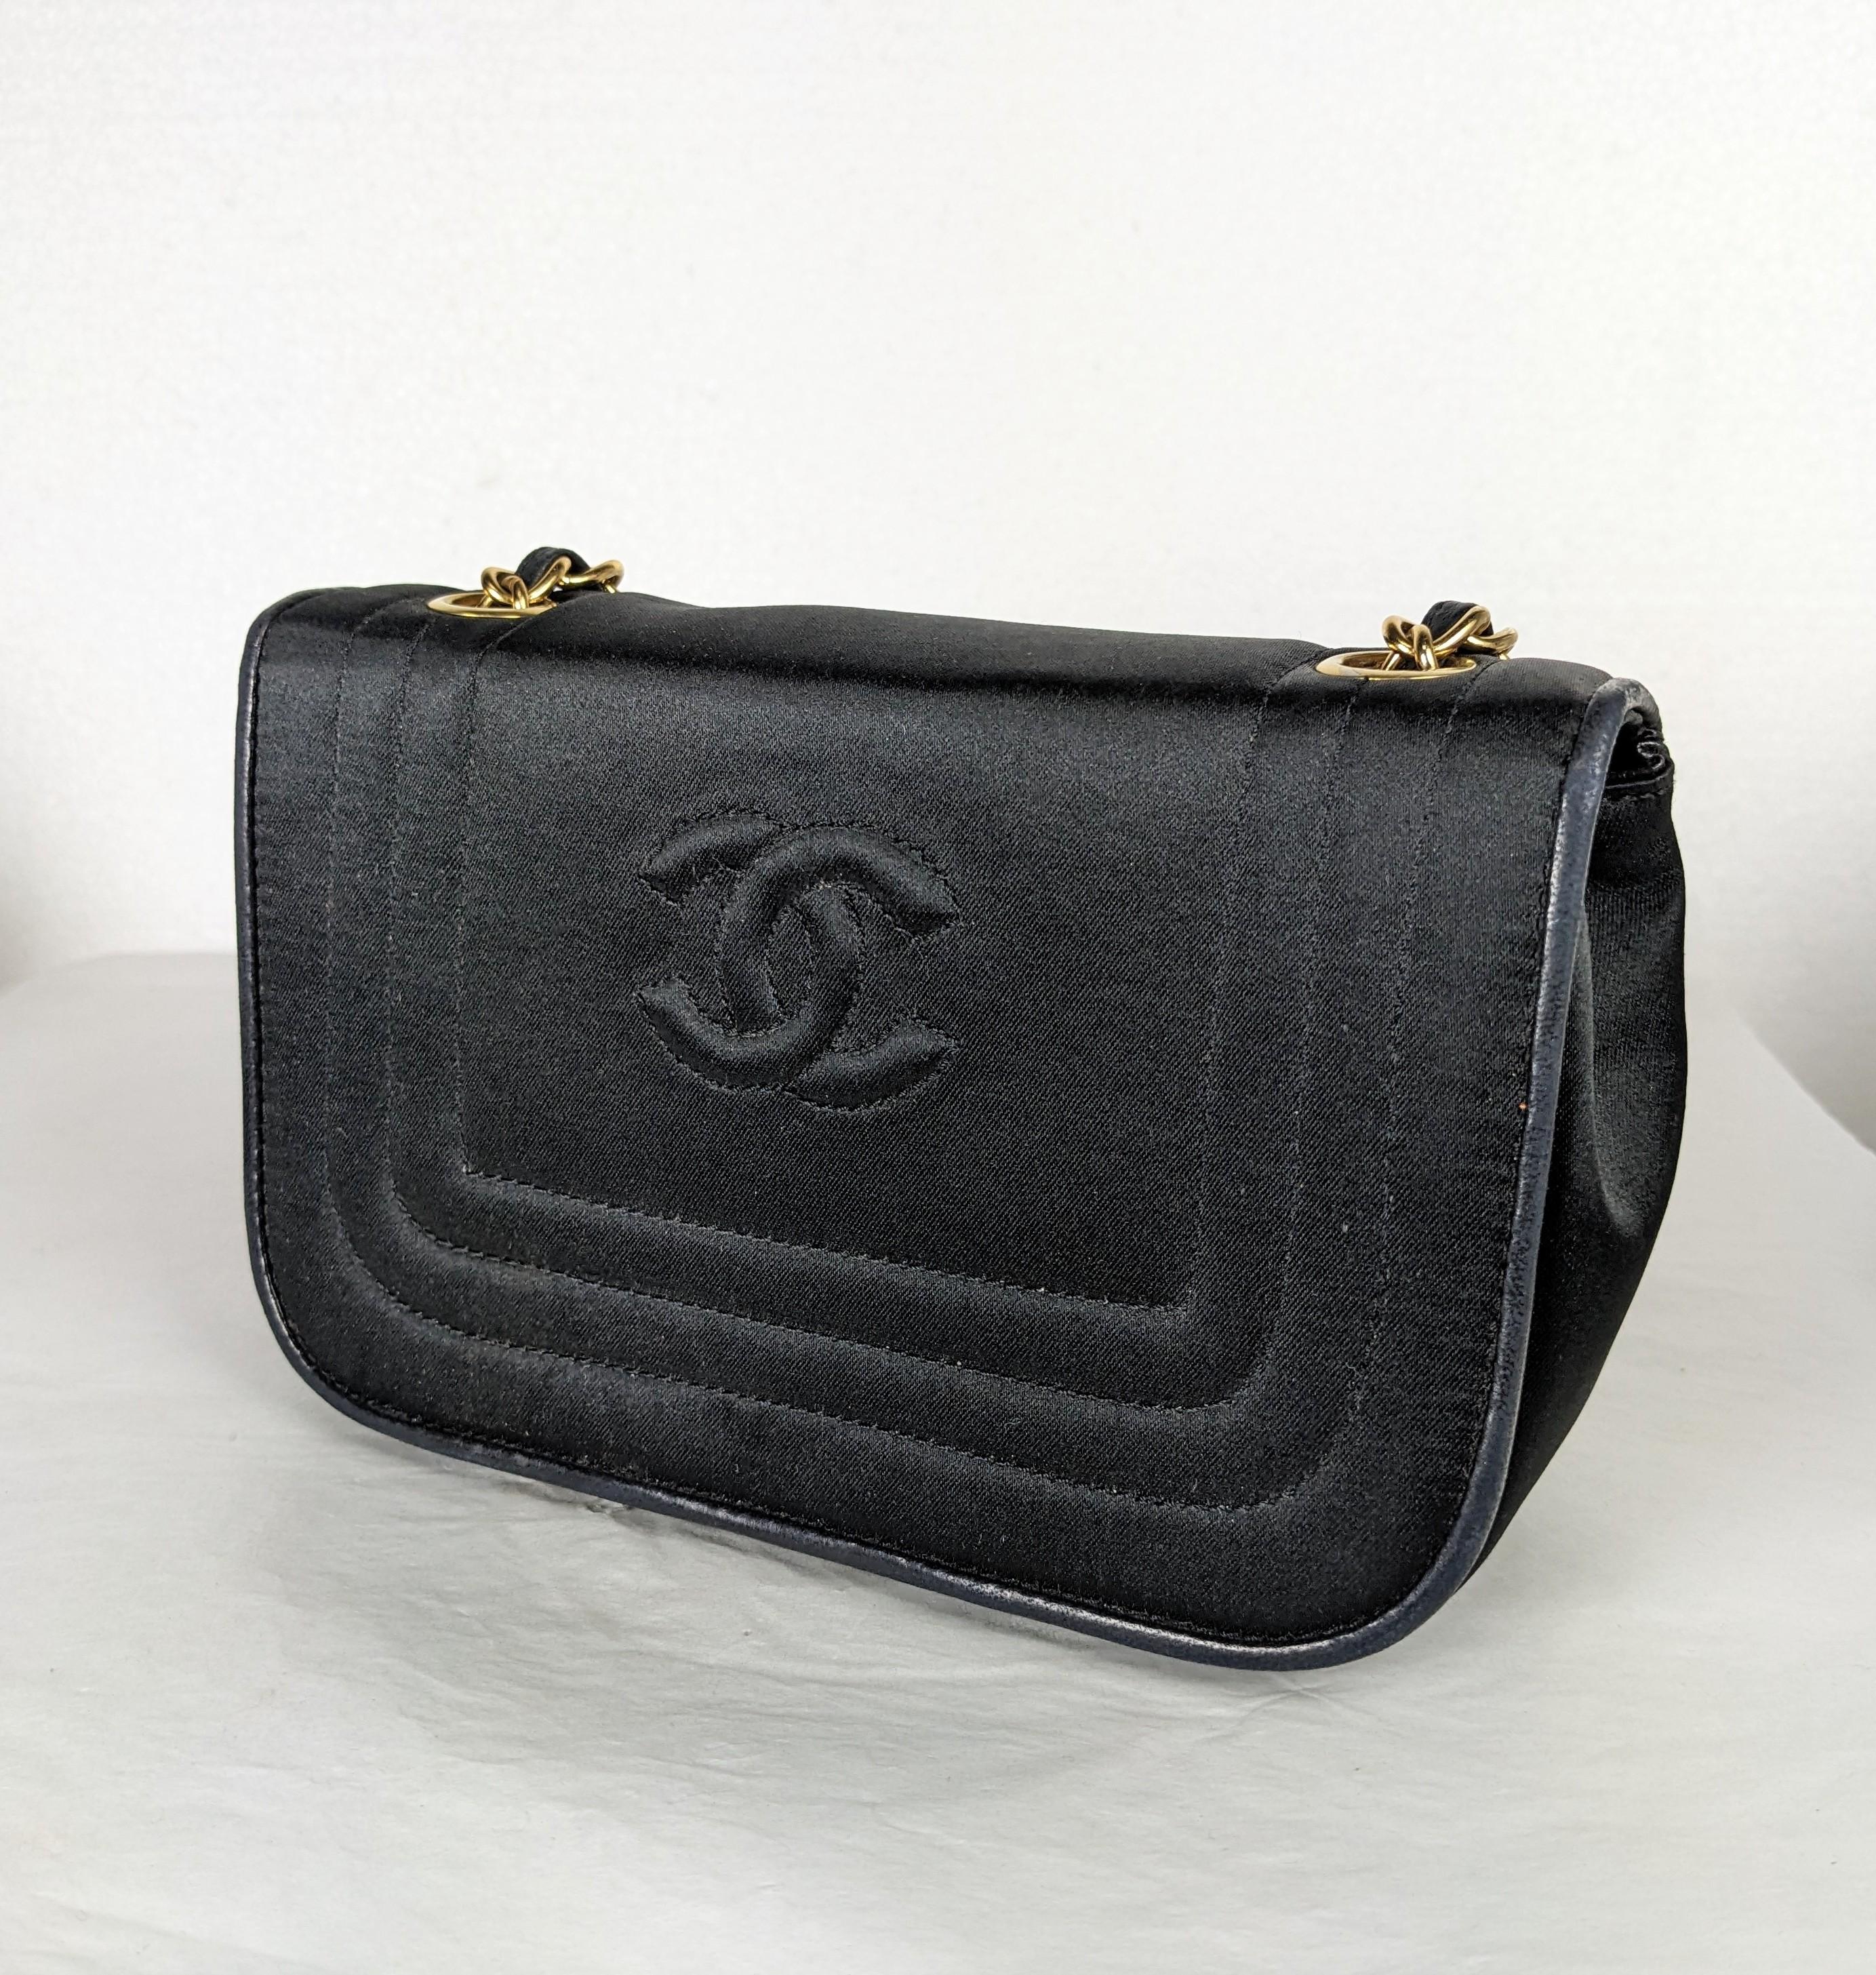 Chanel Satin and Calfskin Mini Shoulder Bag In Excellent Condition For Sale In New York, NY